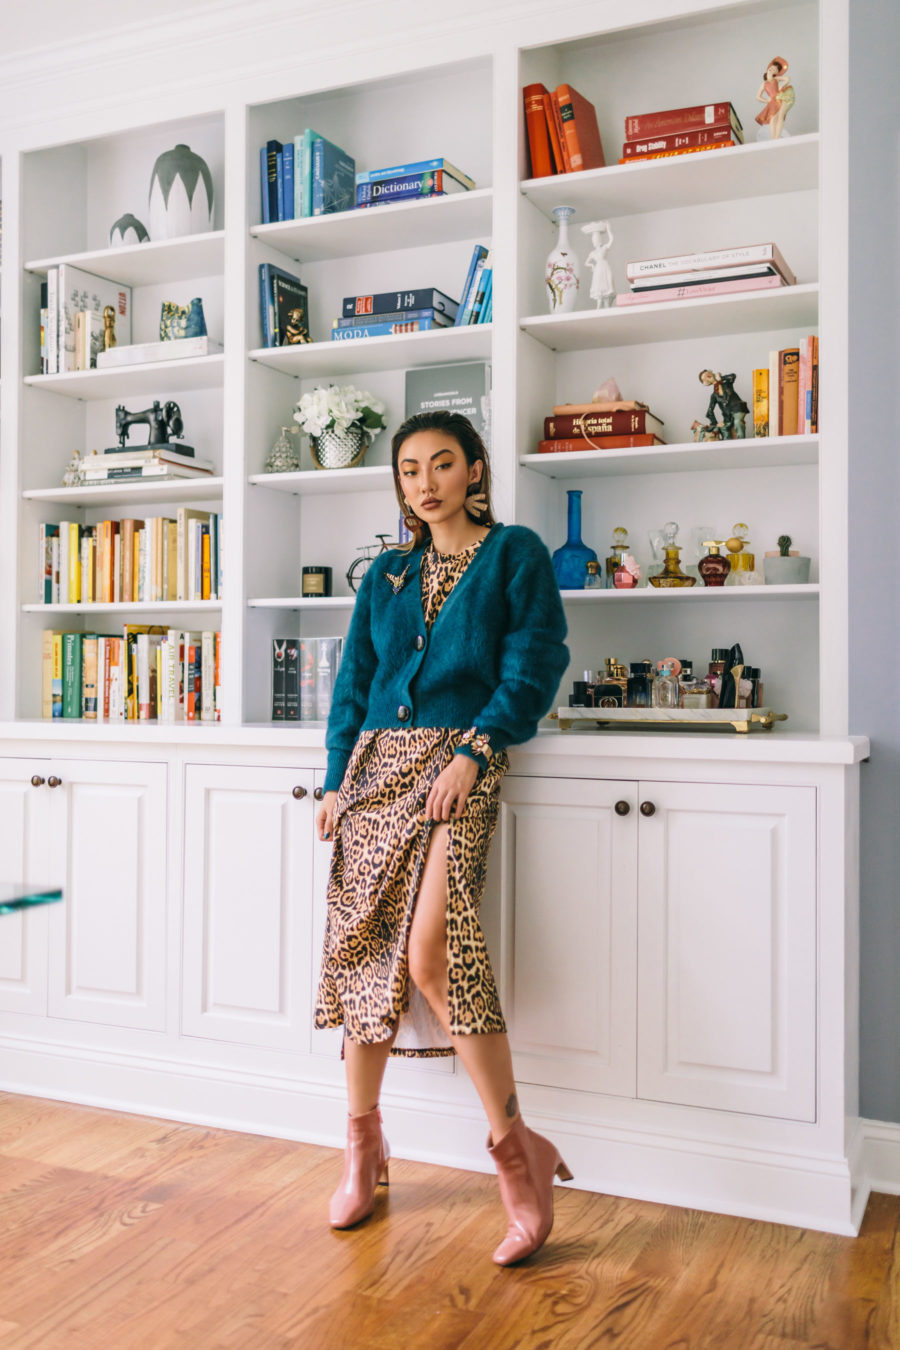 fashion blogger jessica wang wearing Mignonne Gavigan jewelry in her home office // Jessica Wang - Notjessfashion.com